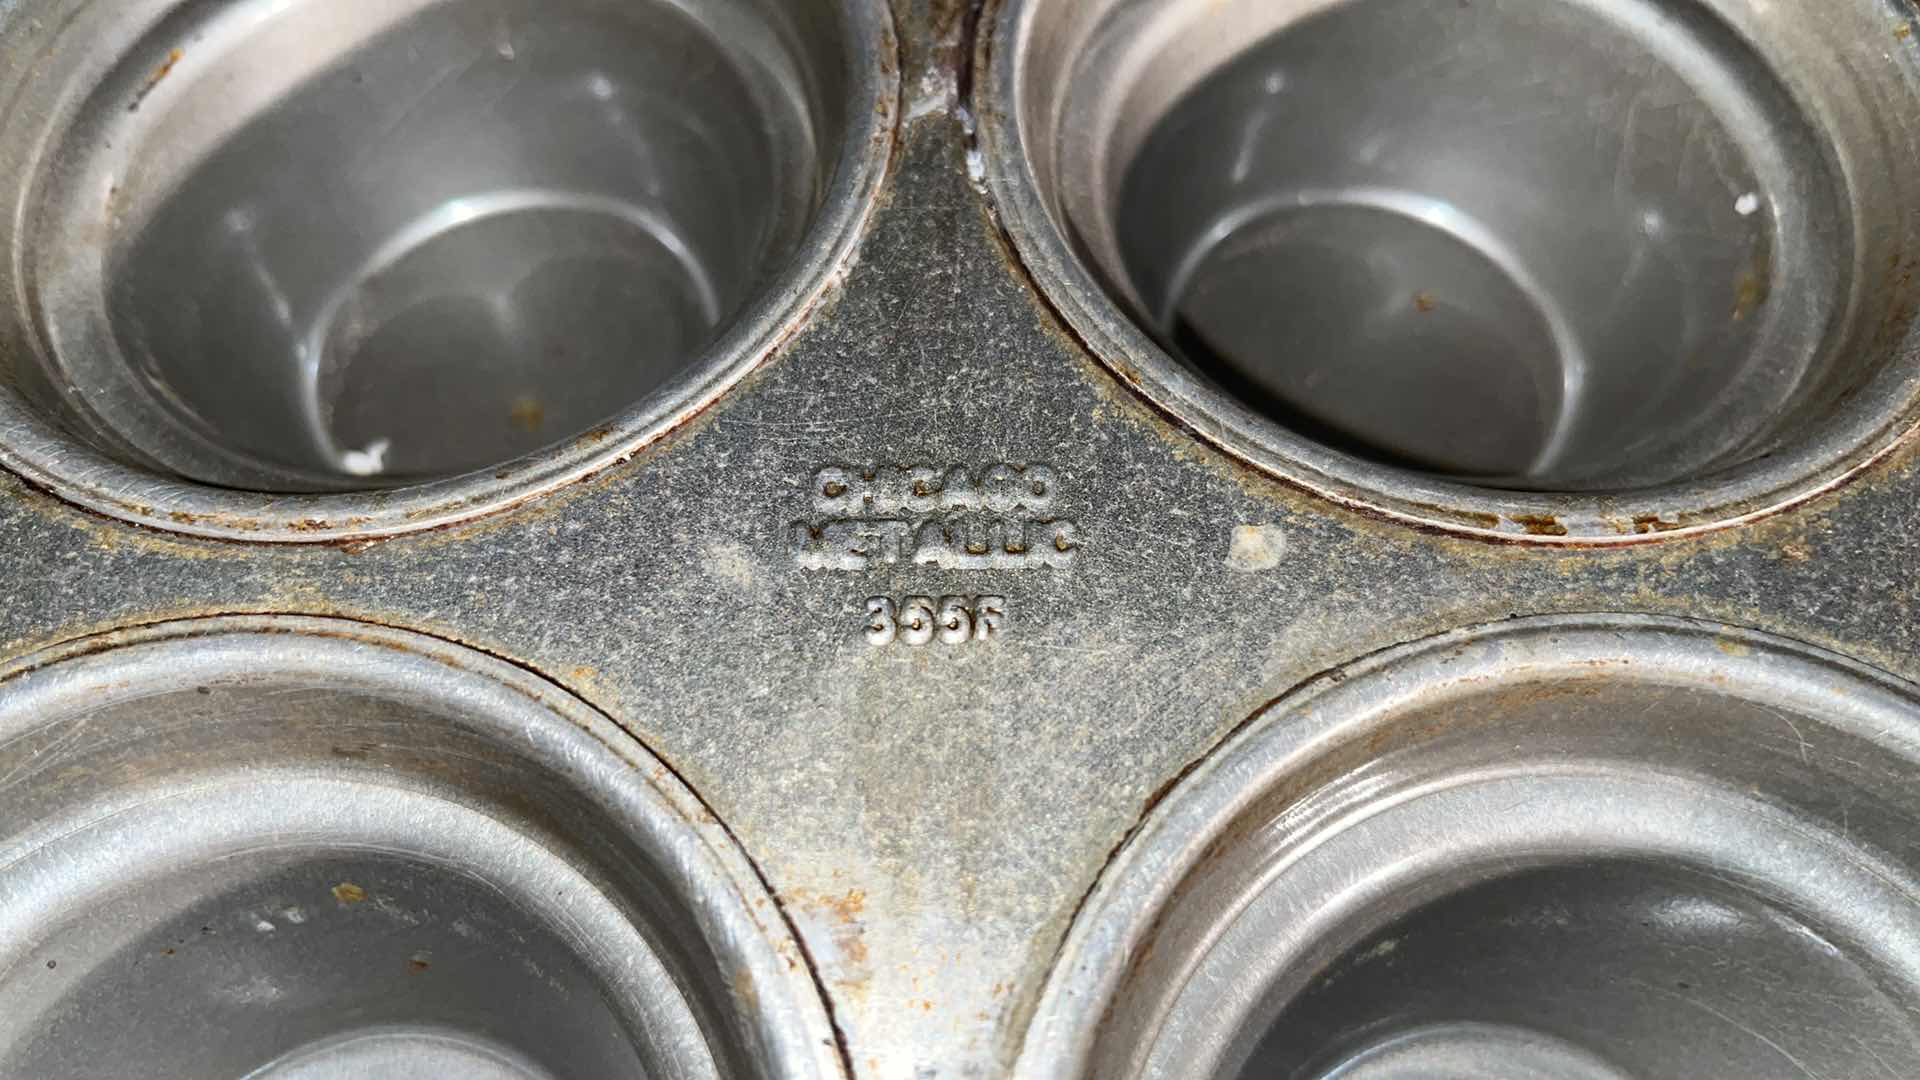 Photo 3 of CHICAGO METALLIC MUFFIN PAN, VARIOUS CONDITIONS MODEL #355F (5)